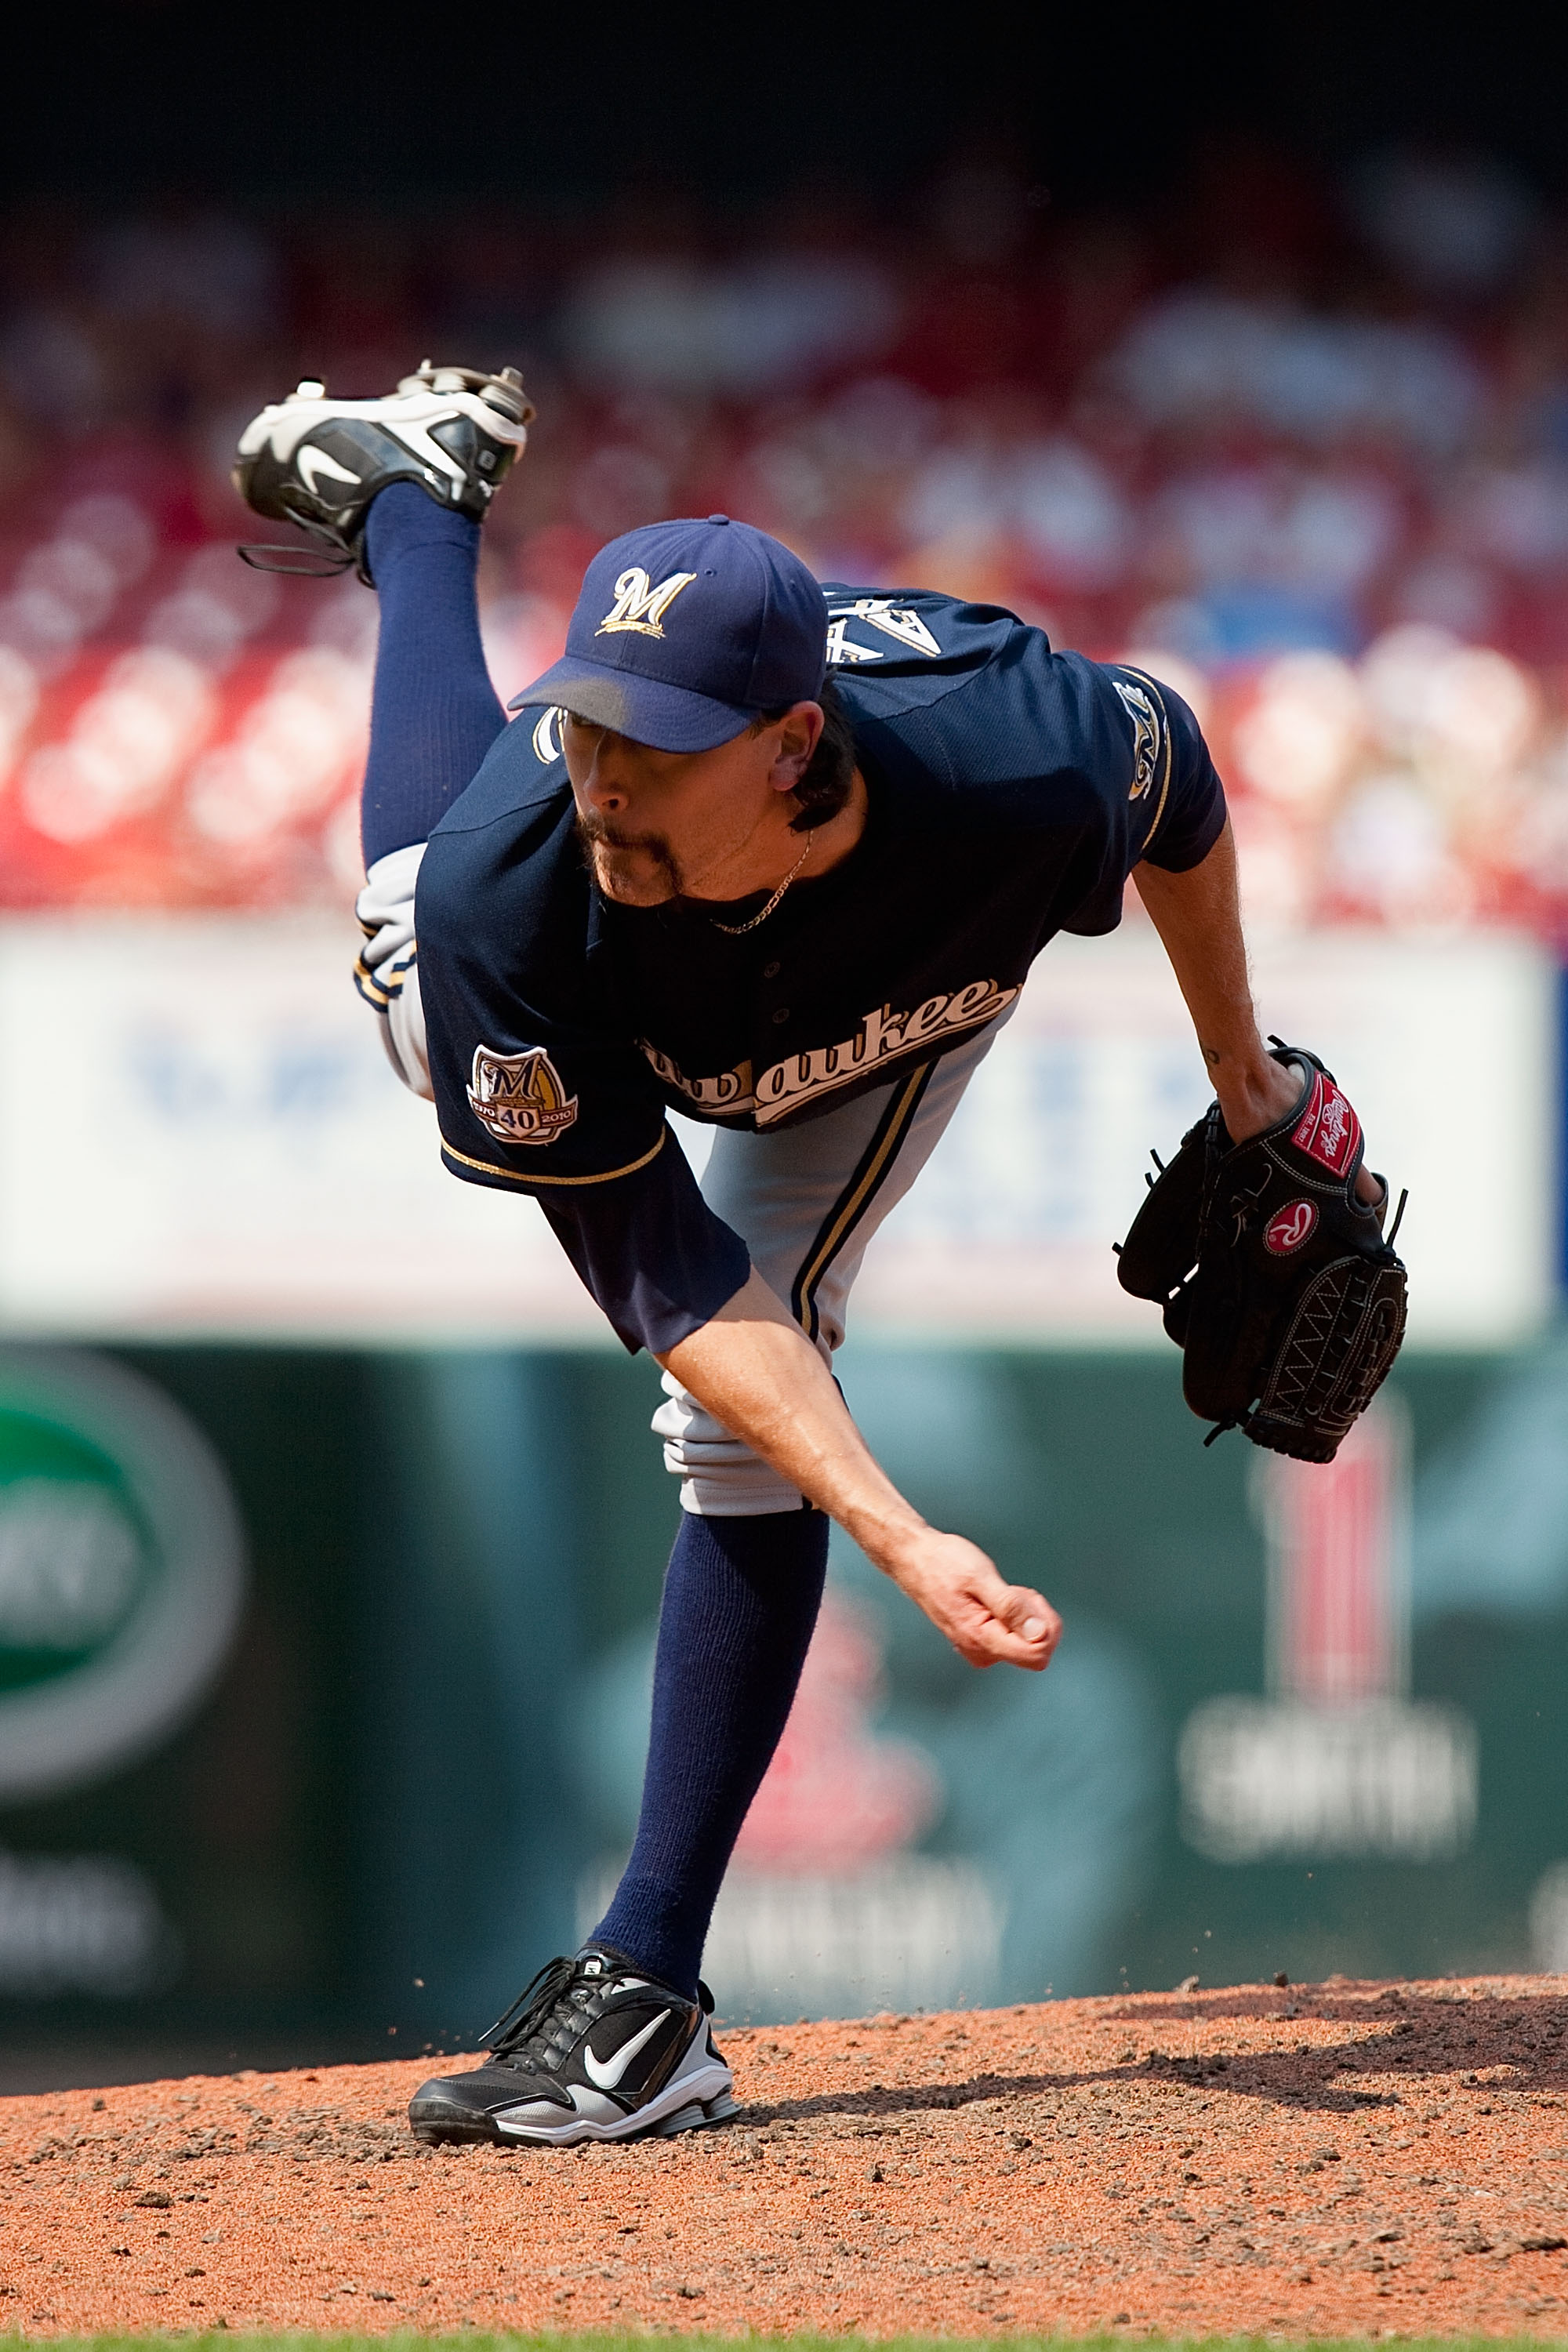 ST. LOUIS - AUGUST 18: Relief pitcher John Axford #59 of the Milwaukee Brewers throws against the St. Louis Cardinals at Busch Stadium on August 18, 2010 in St. Louis, Missouri.  The Brewers beat the Cardinals 3-2.  (Photo by Dilip Vishwanat/Getty Images)